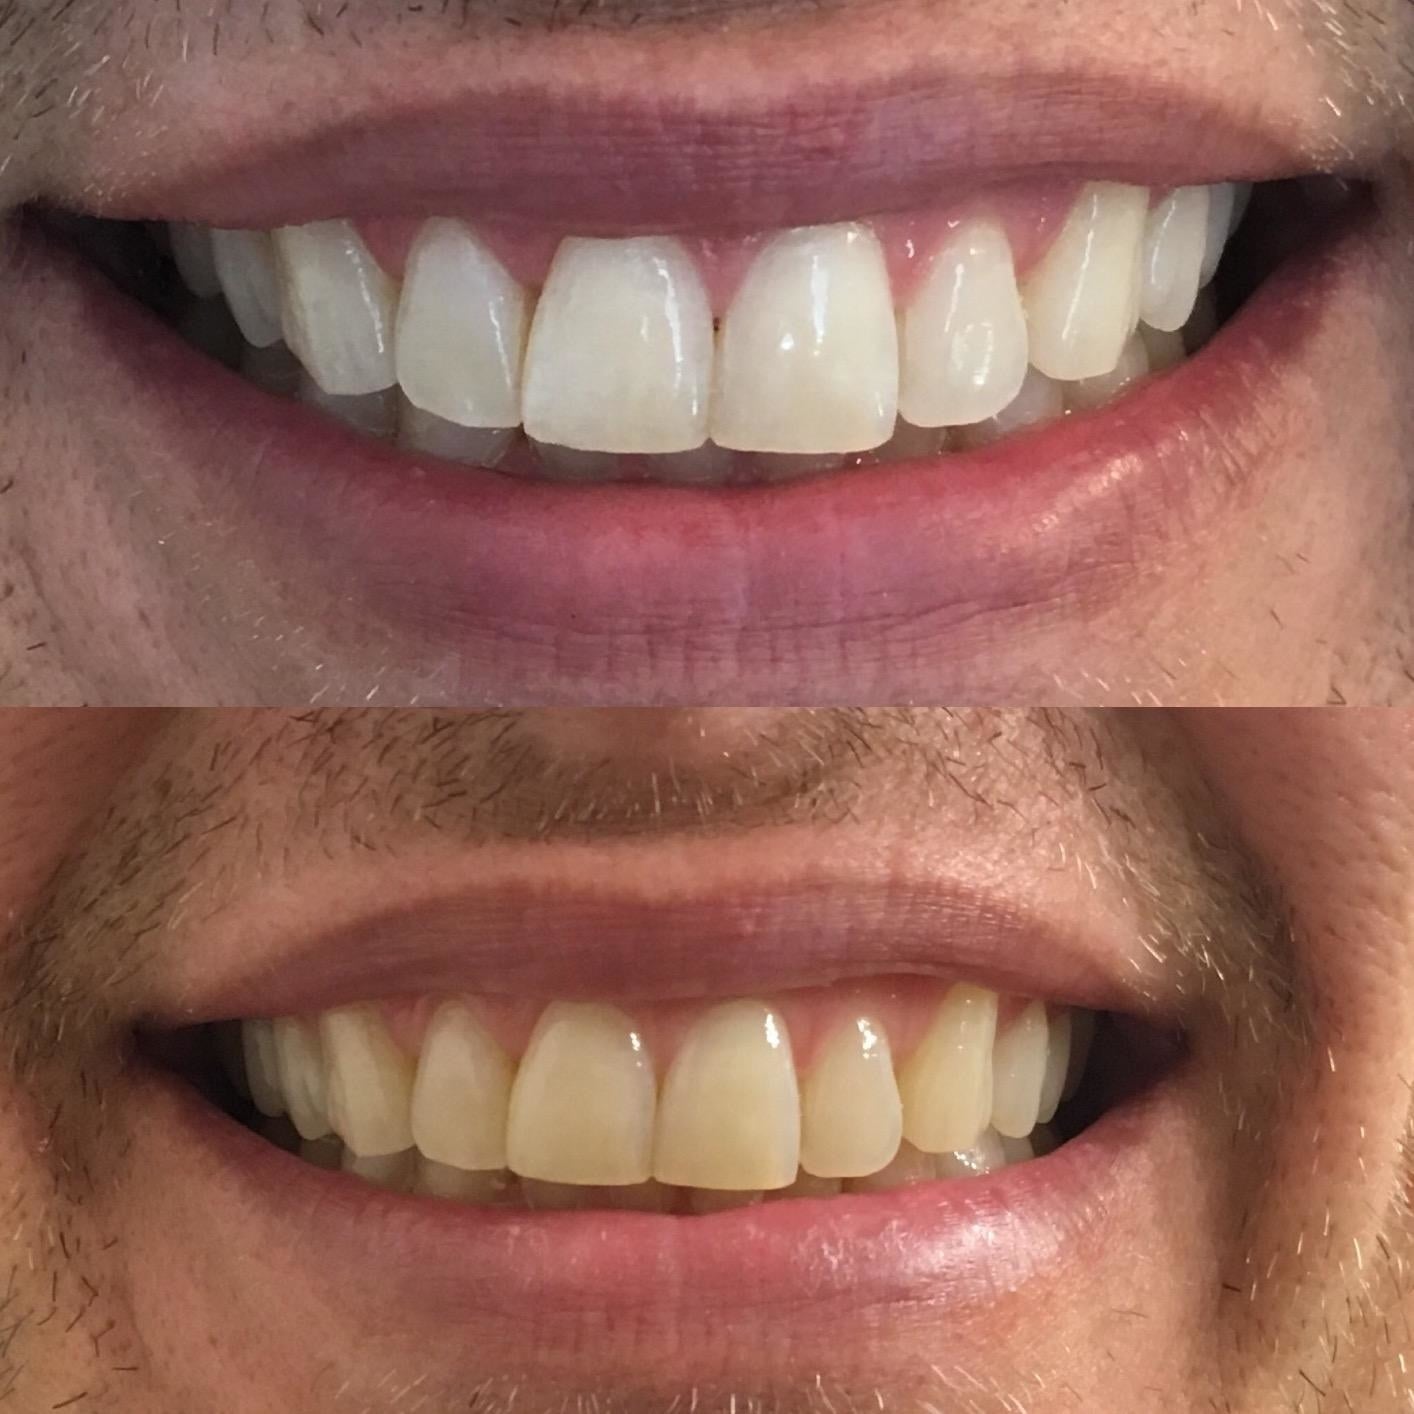 reviewer's before and after of their teeth looking whiter and much less stained after using the whitestrips